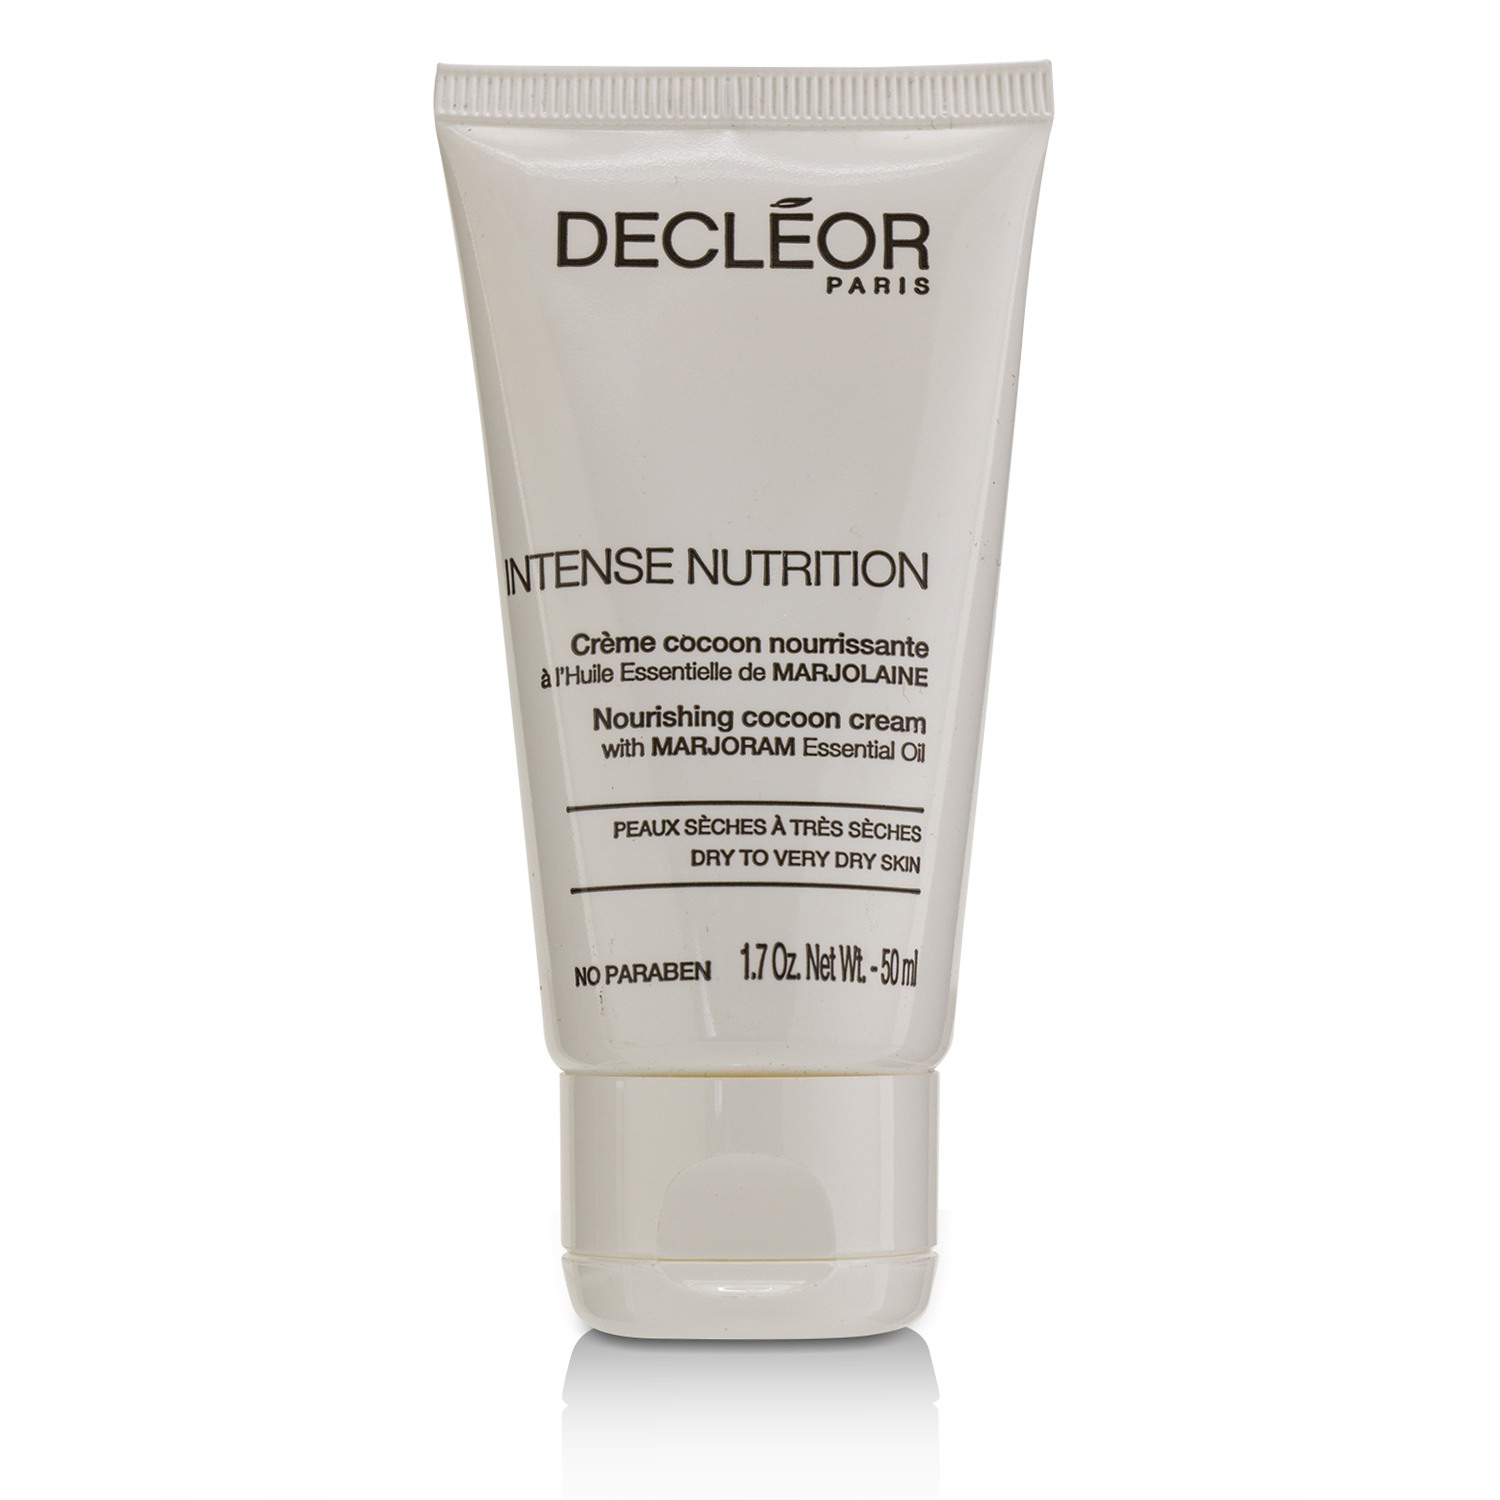 Intense Nutrition Marjoram Nourishing Cocoon Cream - Dry to Very Dry Skin (Salon Product) Decleor Image